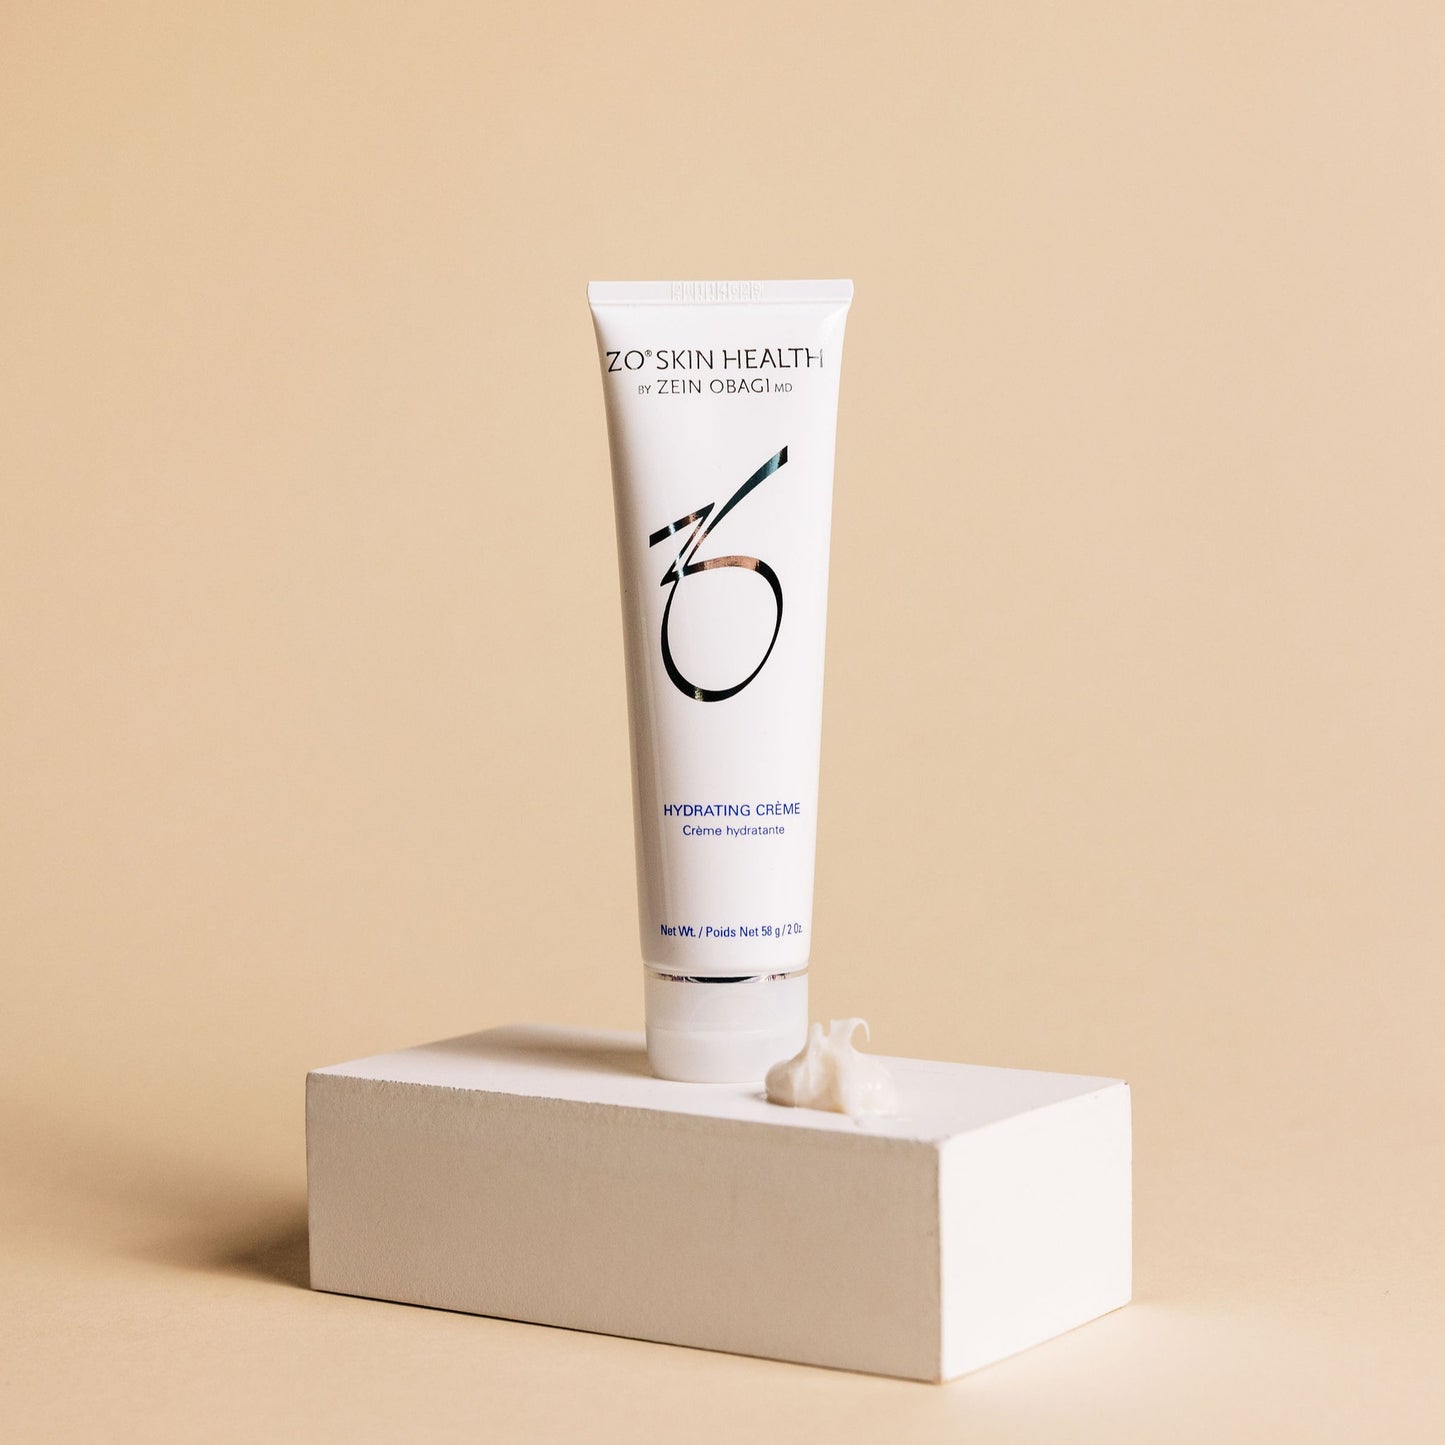 ZO Skin Health's Hydrating Crème in Travel Size